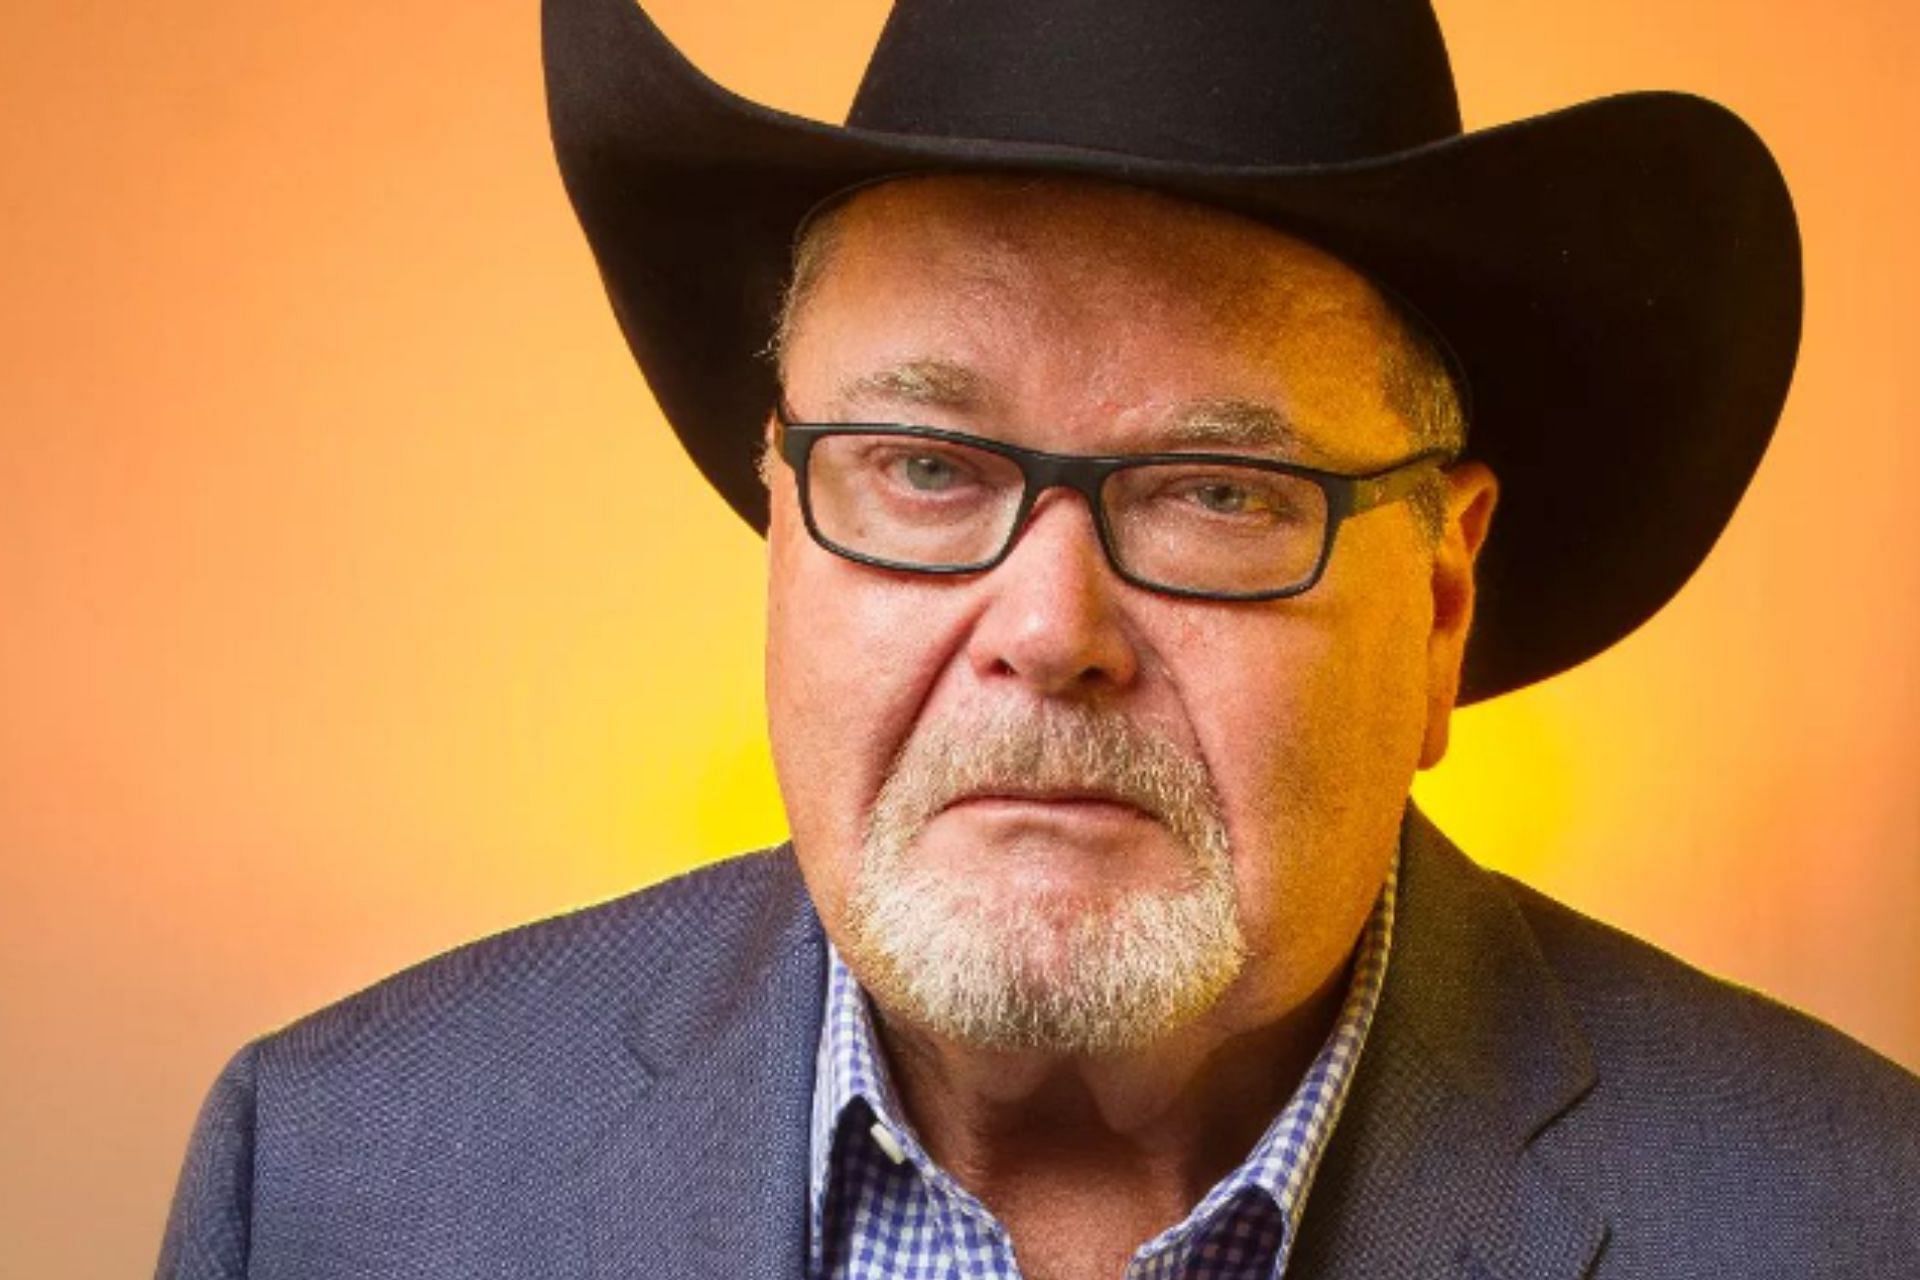 Jim Ross spoke his heart about about WWE referencing an AEW match [Image Source: Jim Ross Instagram]